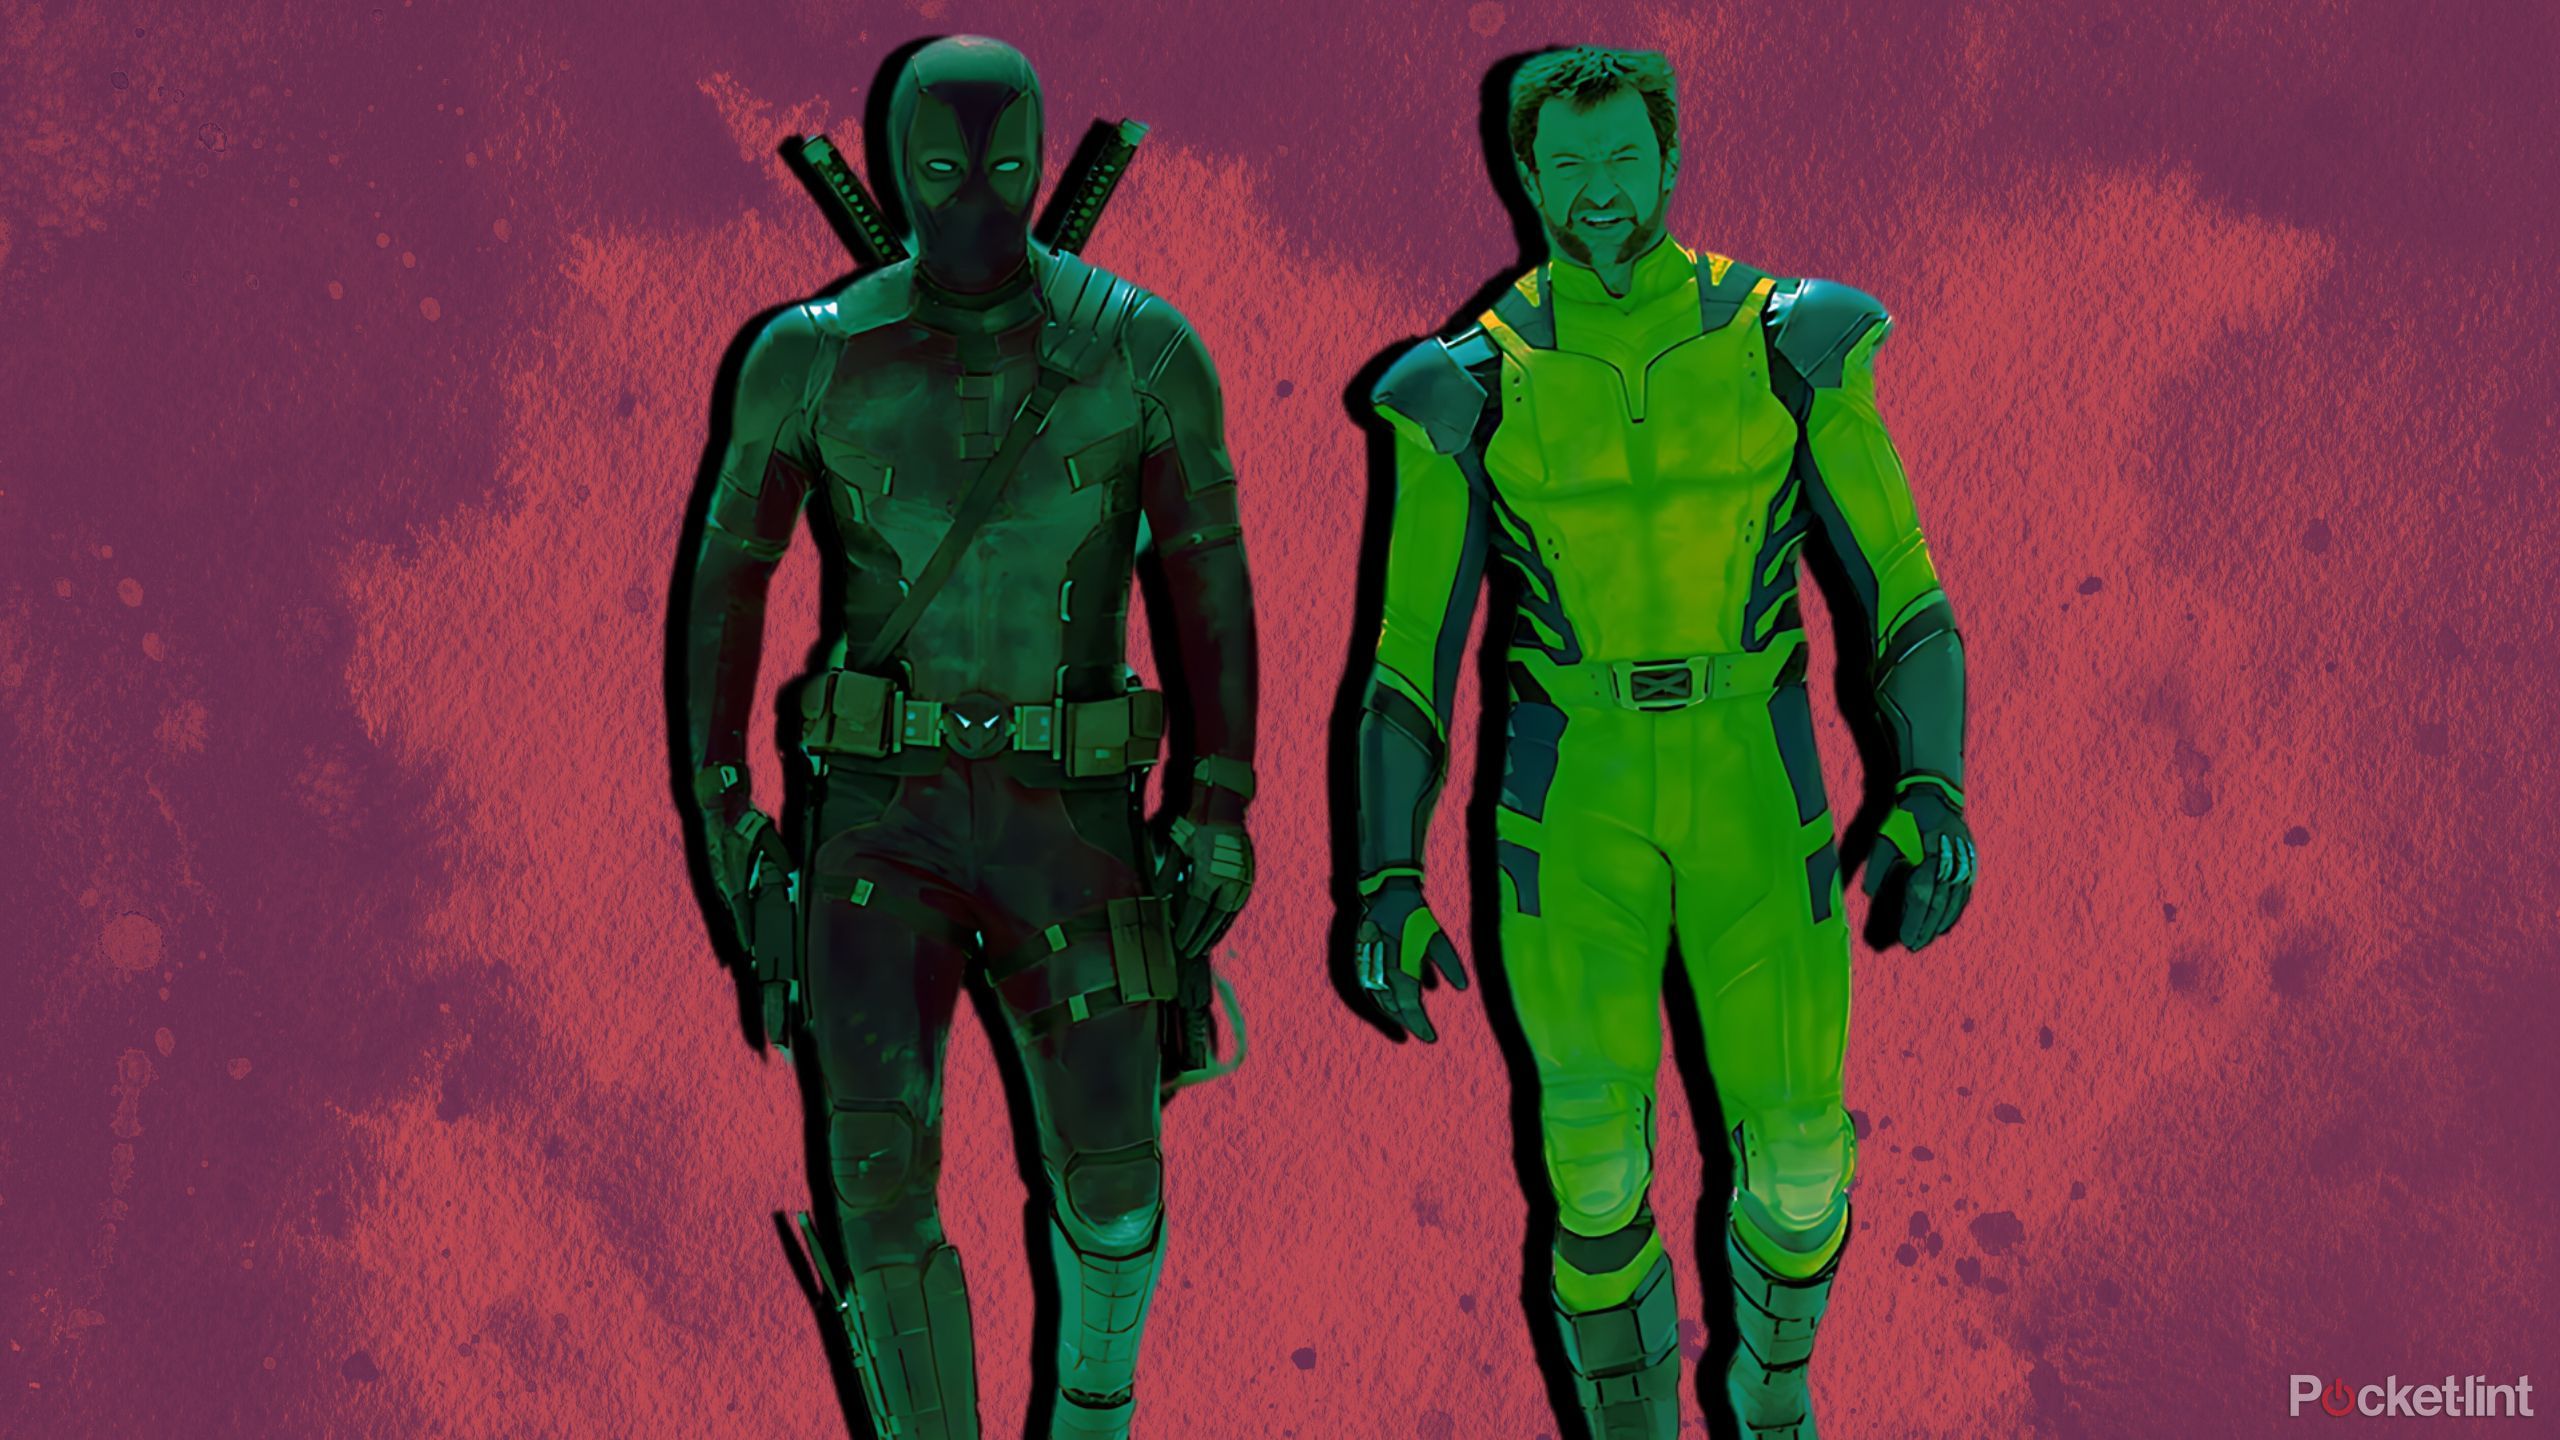 Deadpool and Wolverine highlighted in green against a pink and purple background. 